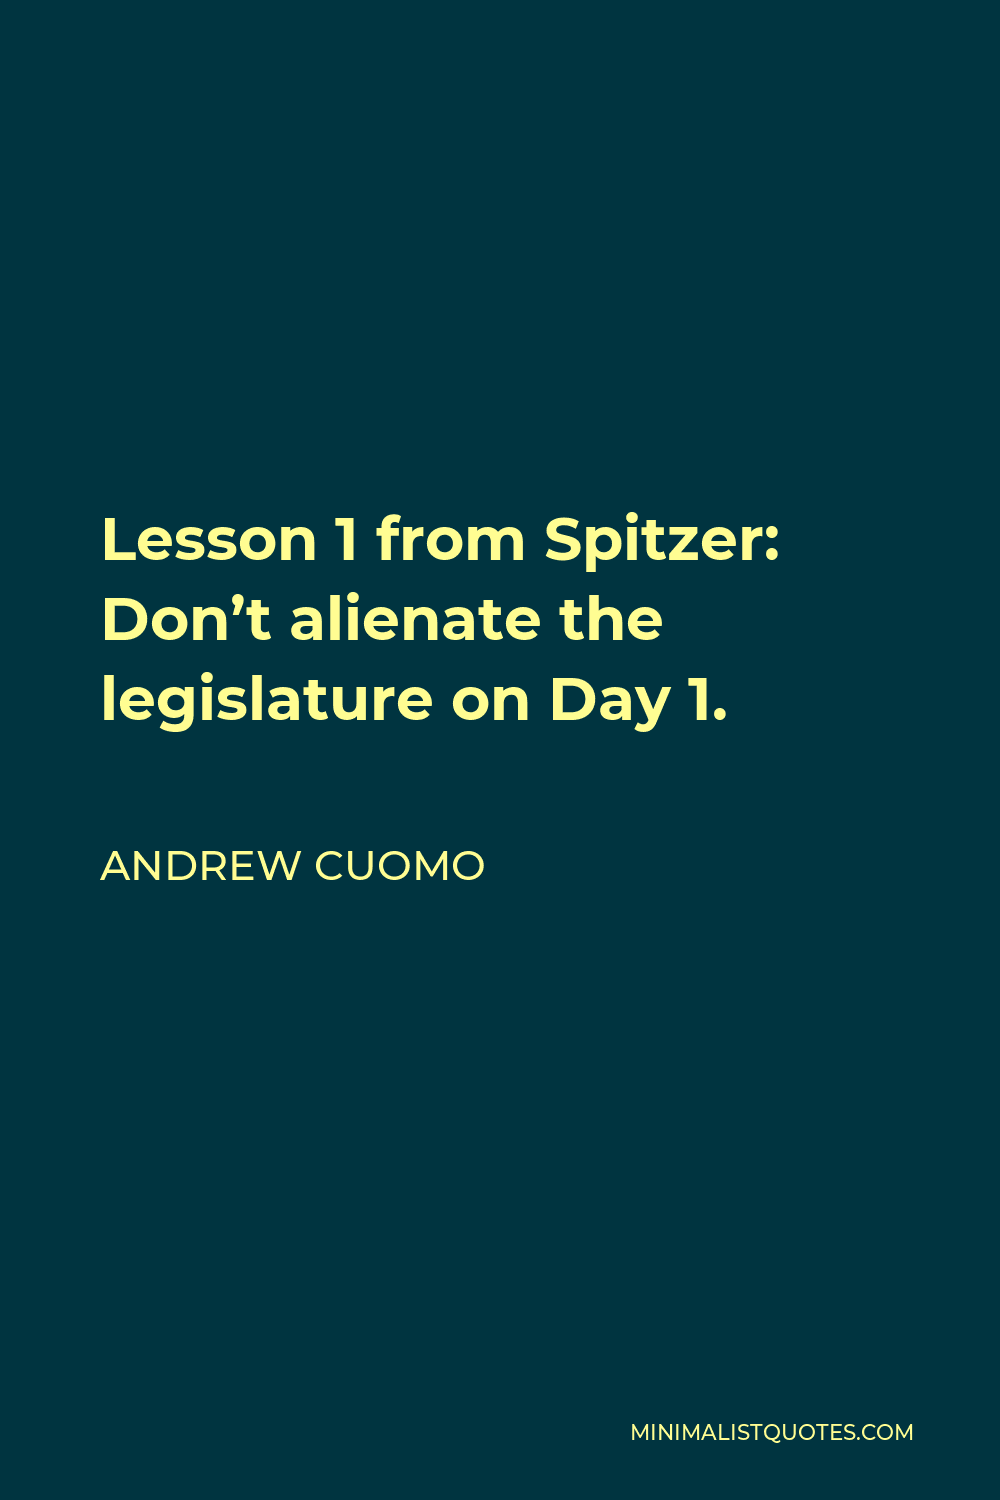 Andrew Cuomo Quote - Lesson 1 from Spitzer: Don’t alienate the legislature on Day 1.